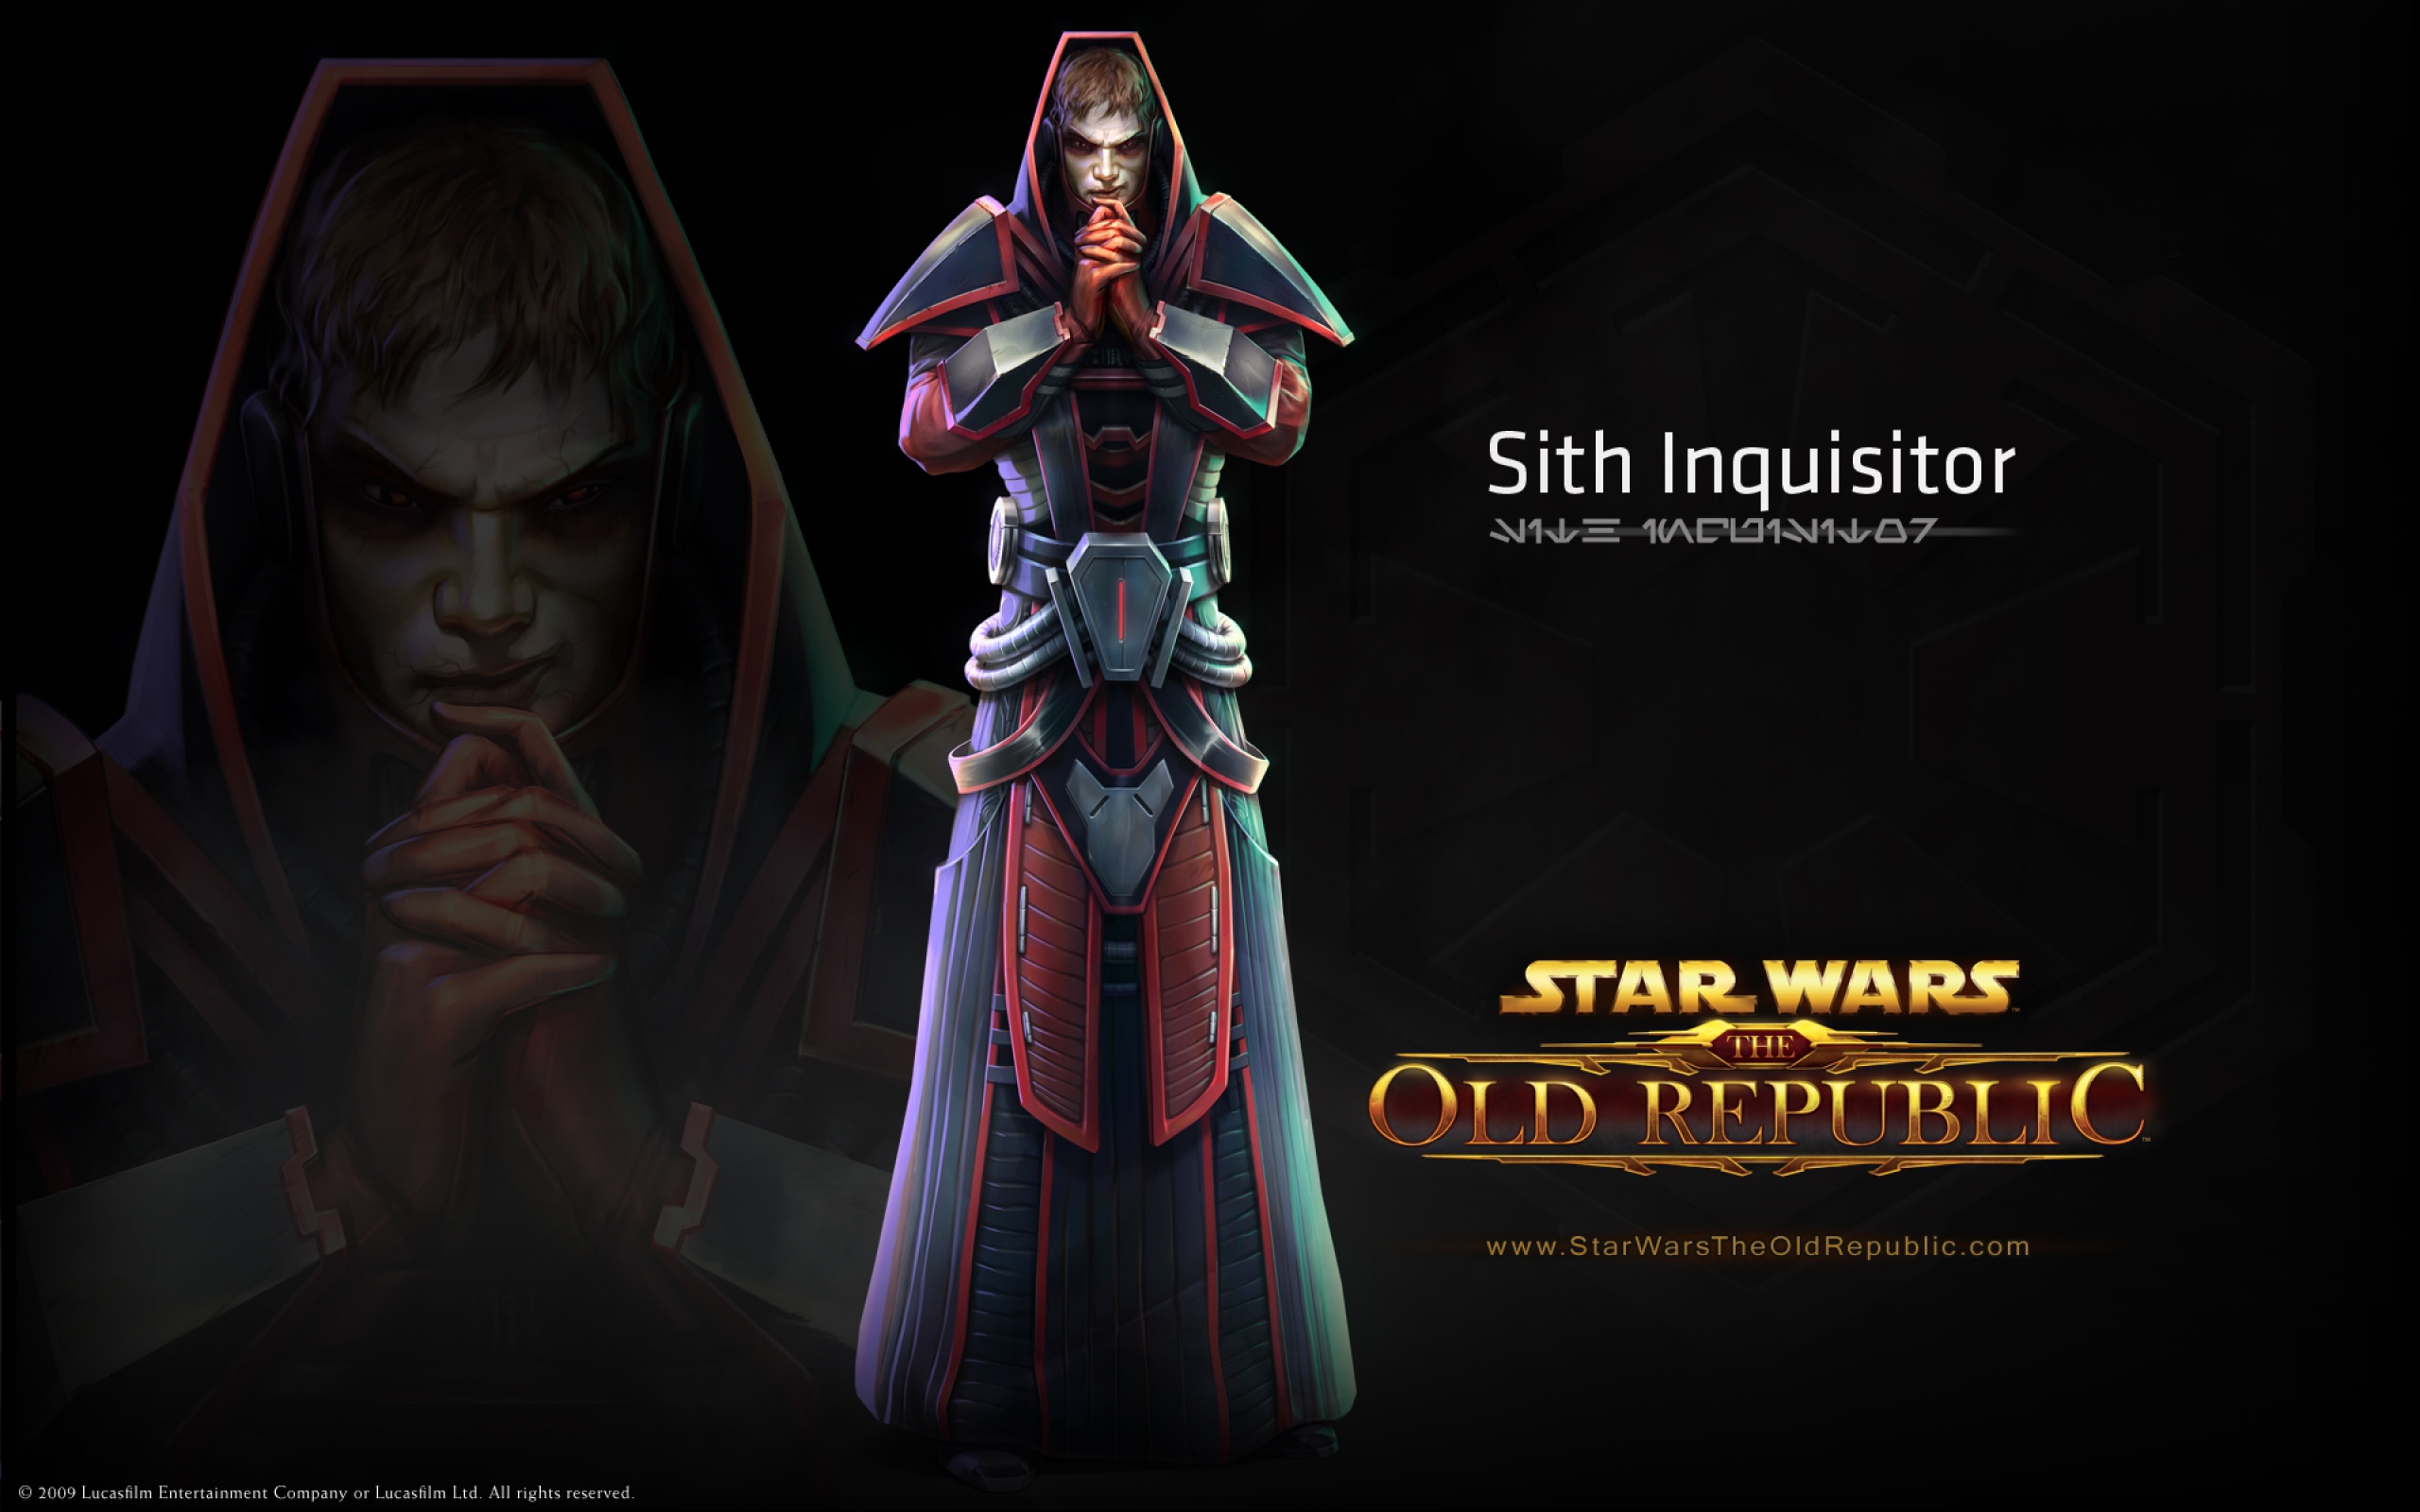 Star Wars The Old Republic Wallpaper Pictures Image